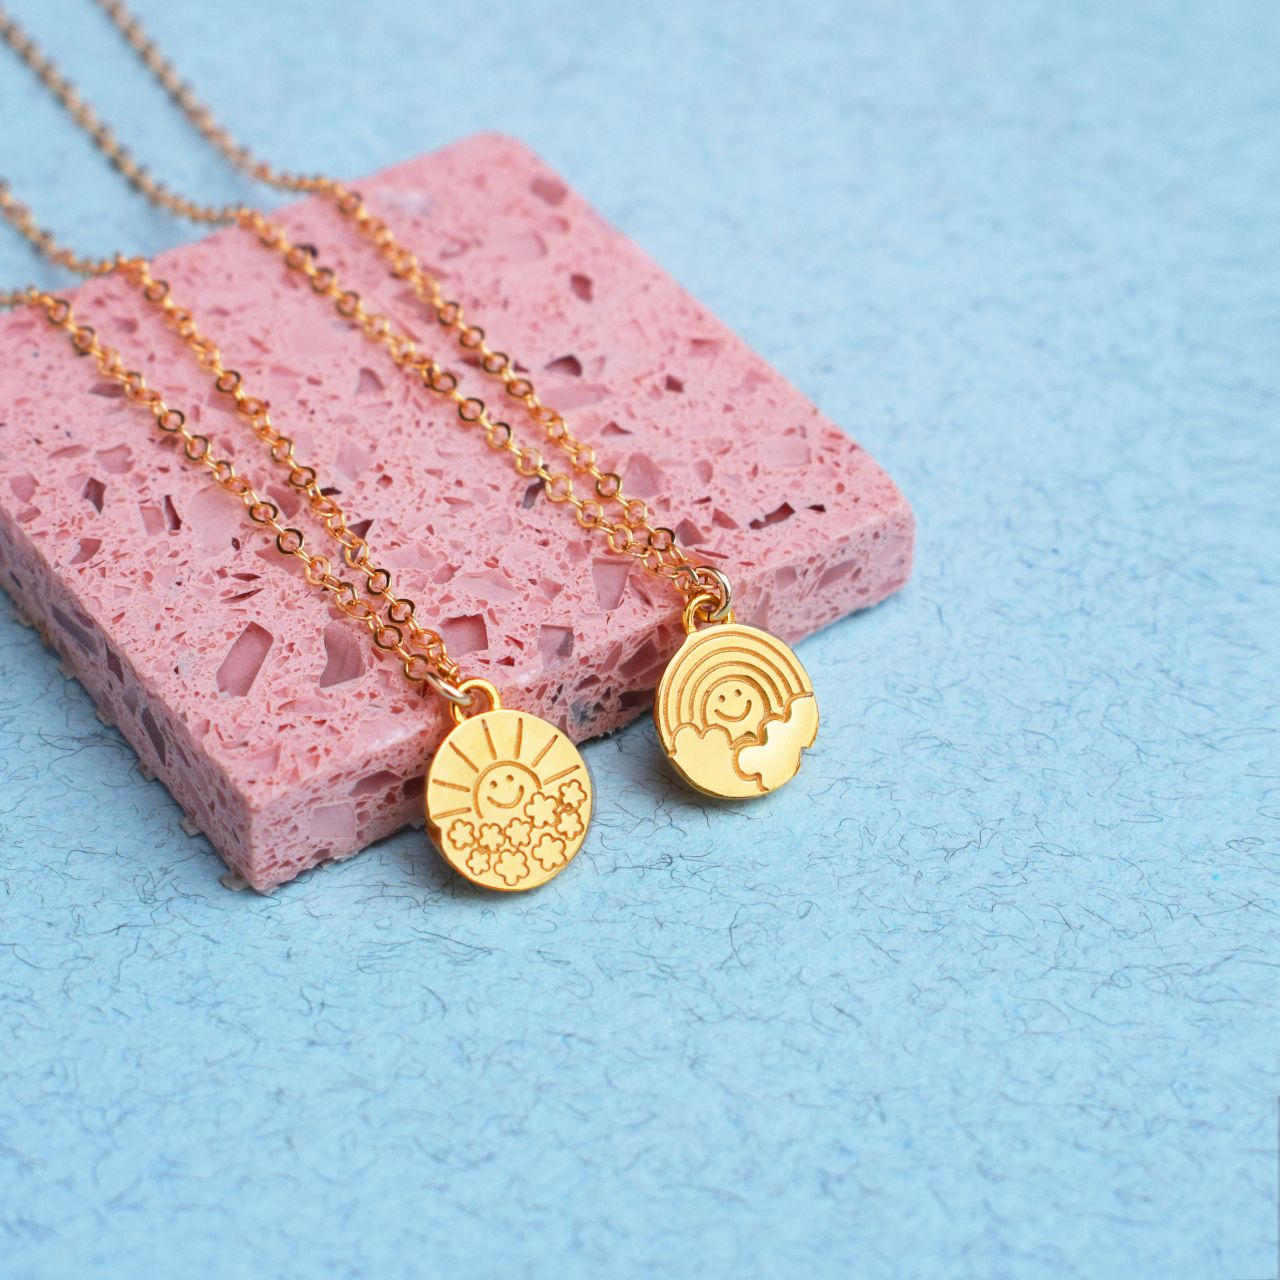 Happy Together necklaces by [Good Daze](https://gooddazeahead.com/shop/happy-together-necklaces)